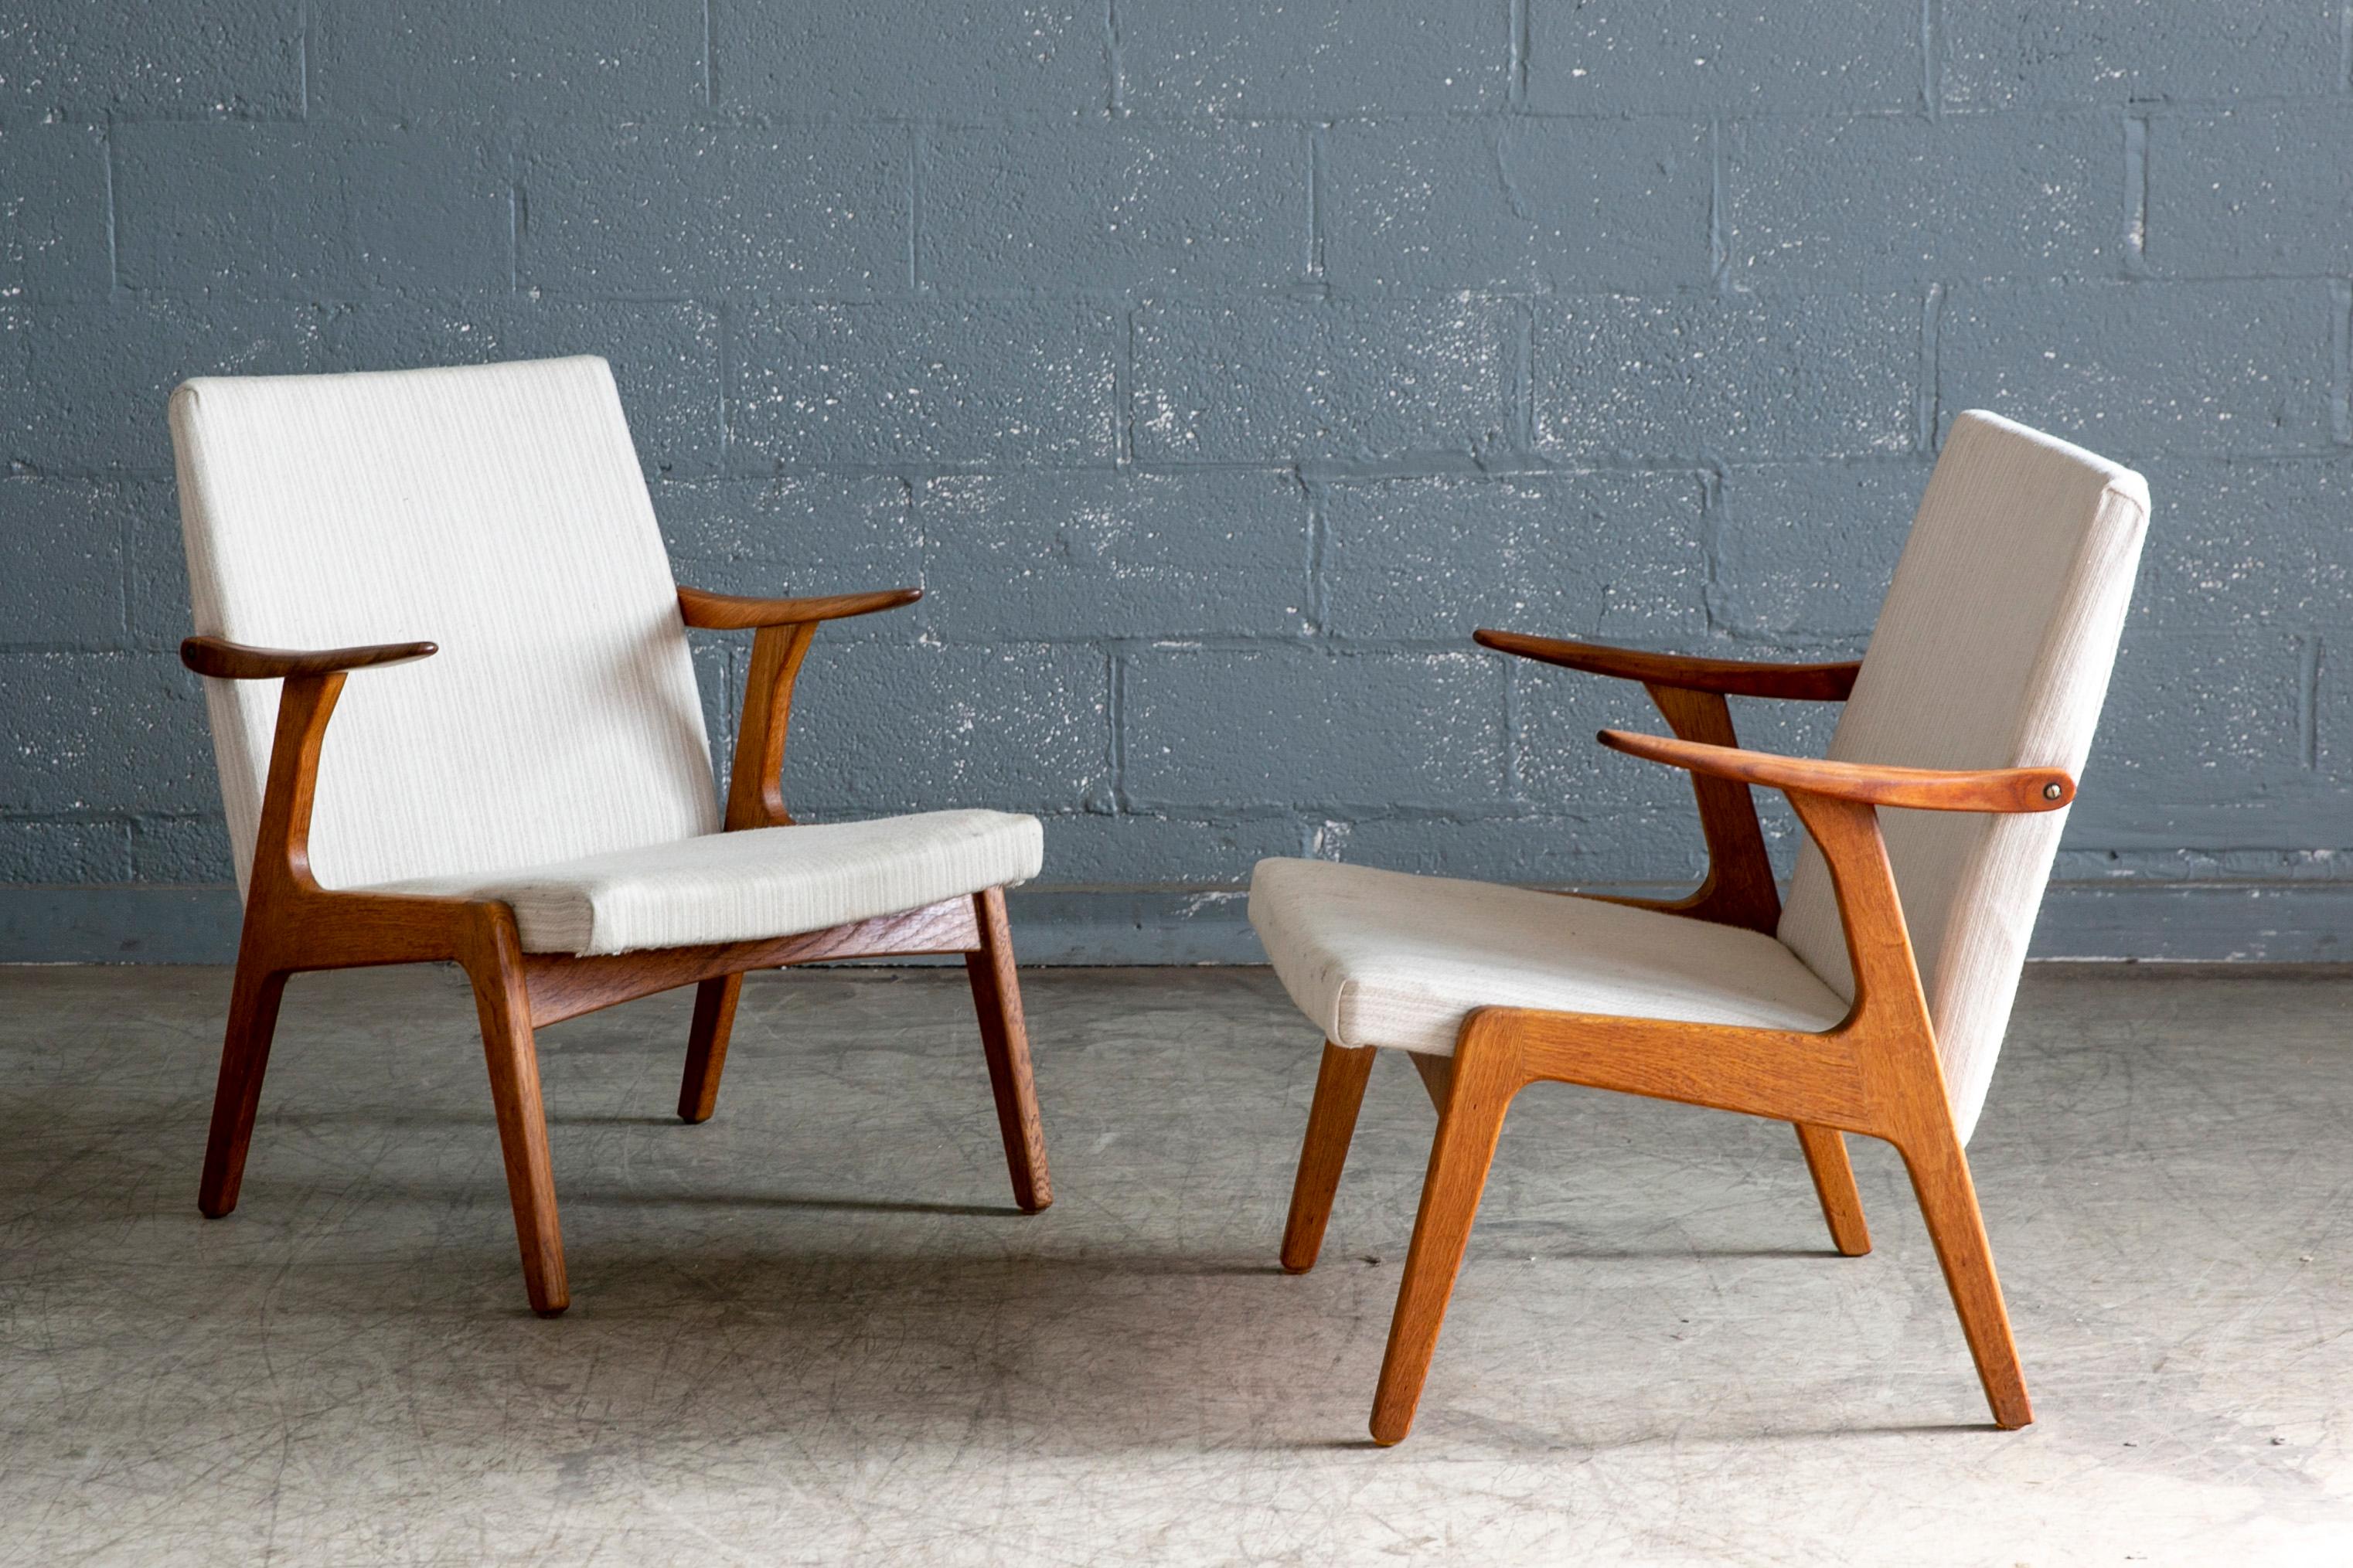 Great set of 1950s low back easy chairs by attributed Kurt Olsen and Glostrup Mobelfabrik. Olsen's characteristic design of small dynamic lounge chairs raised on frames of solid oak and with armrests in solid teak with good grain and color. Original